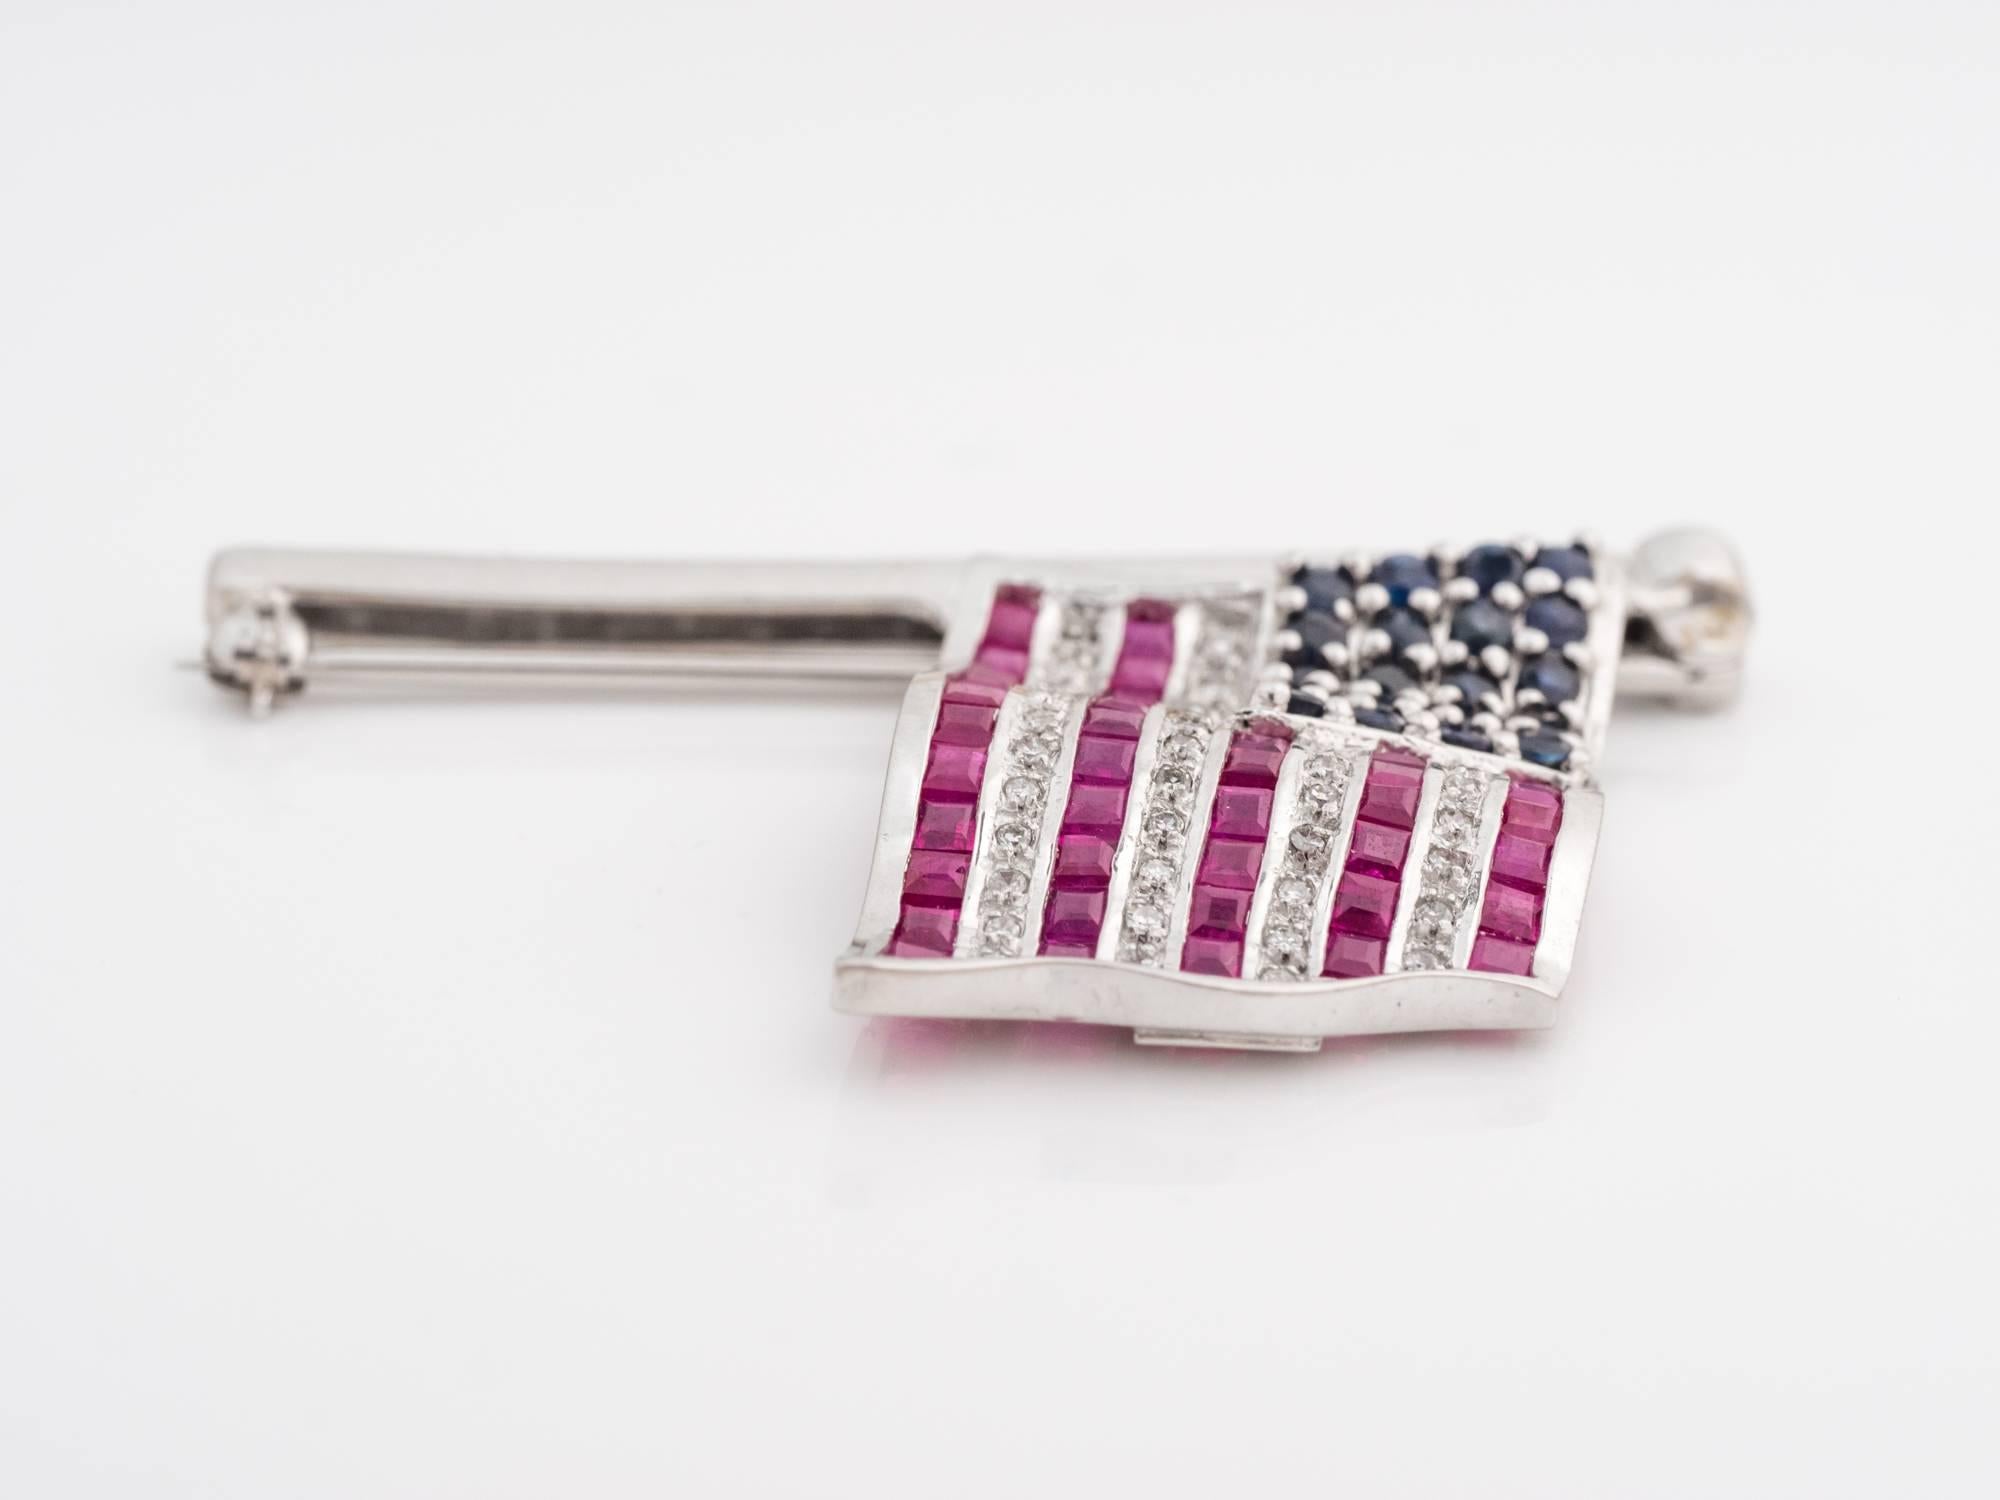 Hand-made American flag with natural round sapphires, natural square rubies and natural single cut diamonds. The 20 sapphires weigh .60 carats, 42 rubies weigh 2.00 carats, and the diamonds weigh .25 carats. The flag has hinges to allow a slight